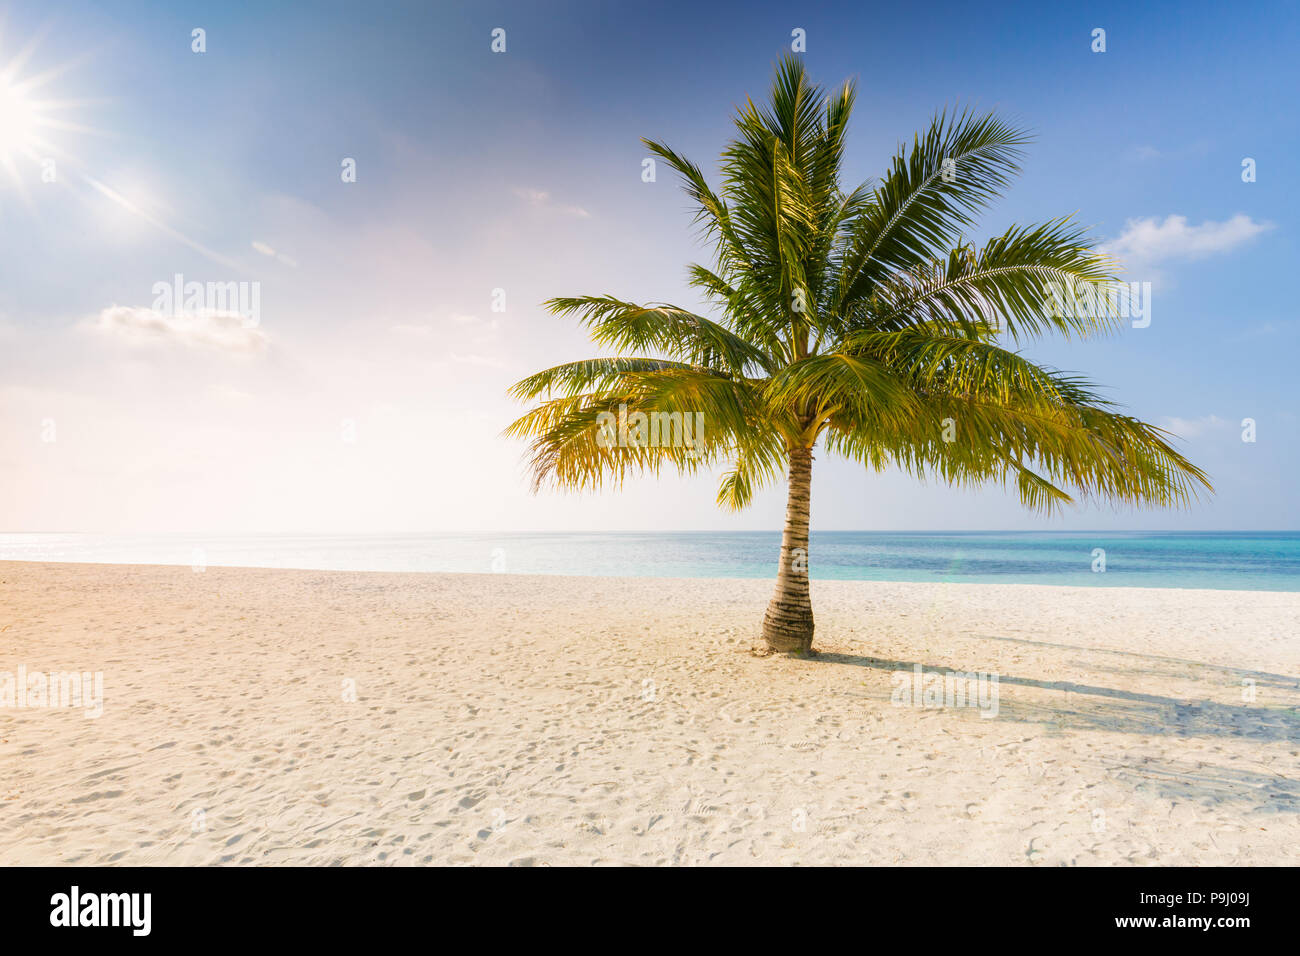 Palm on the beach, sunny day at the beach, calm landscape of seashore, tranquil tropical nature Stock Photo